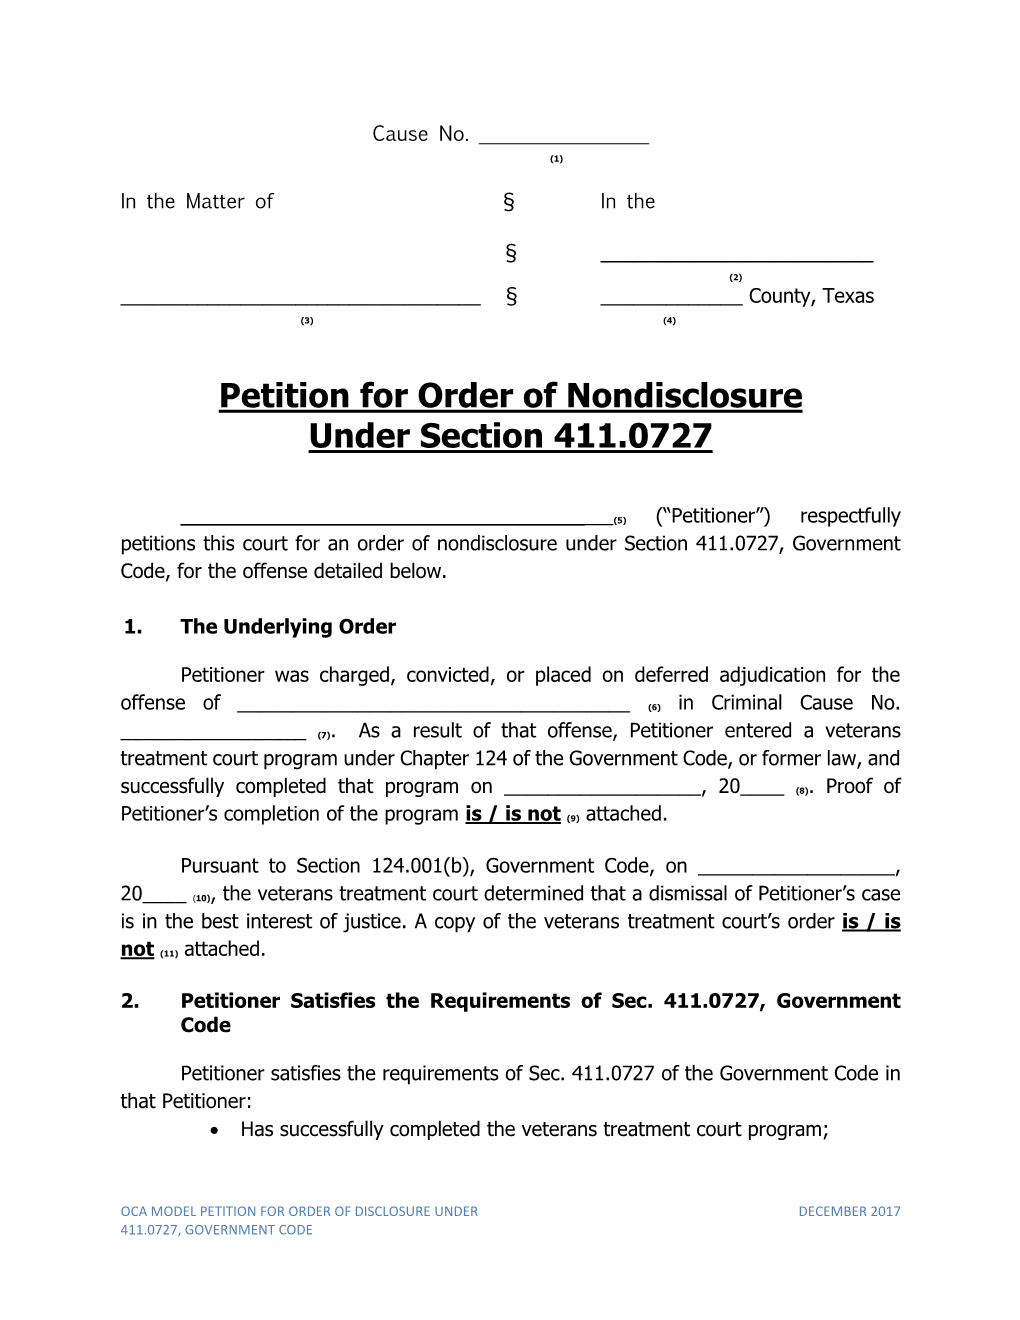 Petition for Order of Nondisclosure Under Section 411.0727